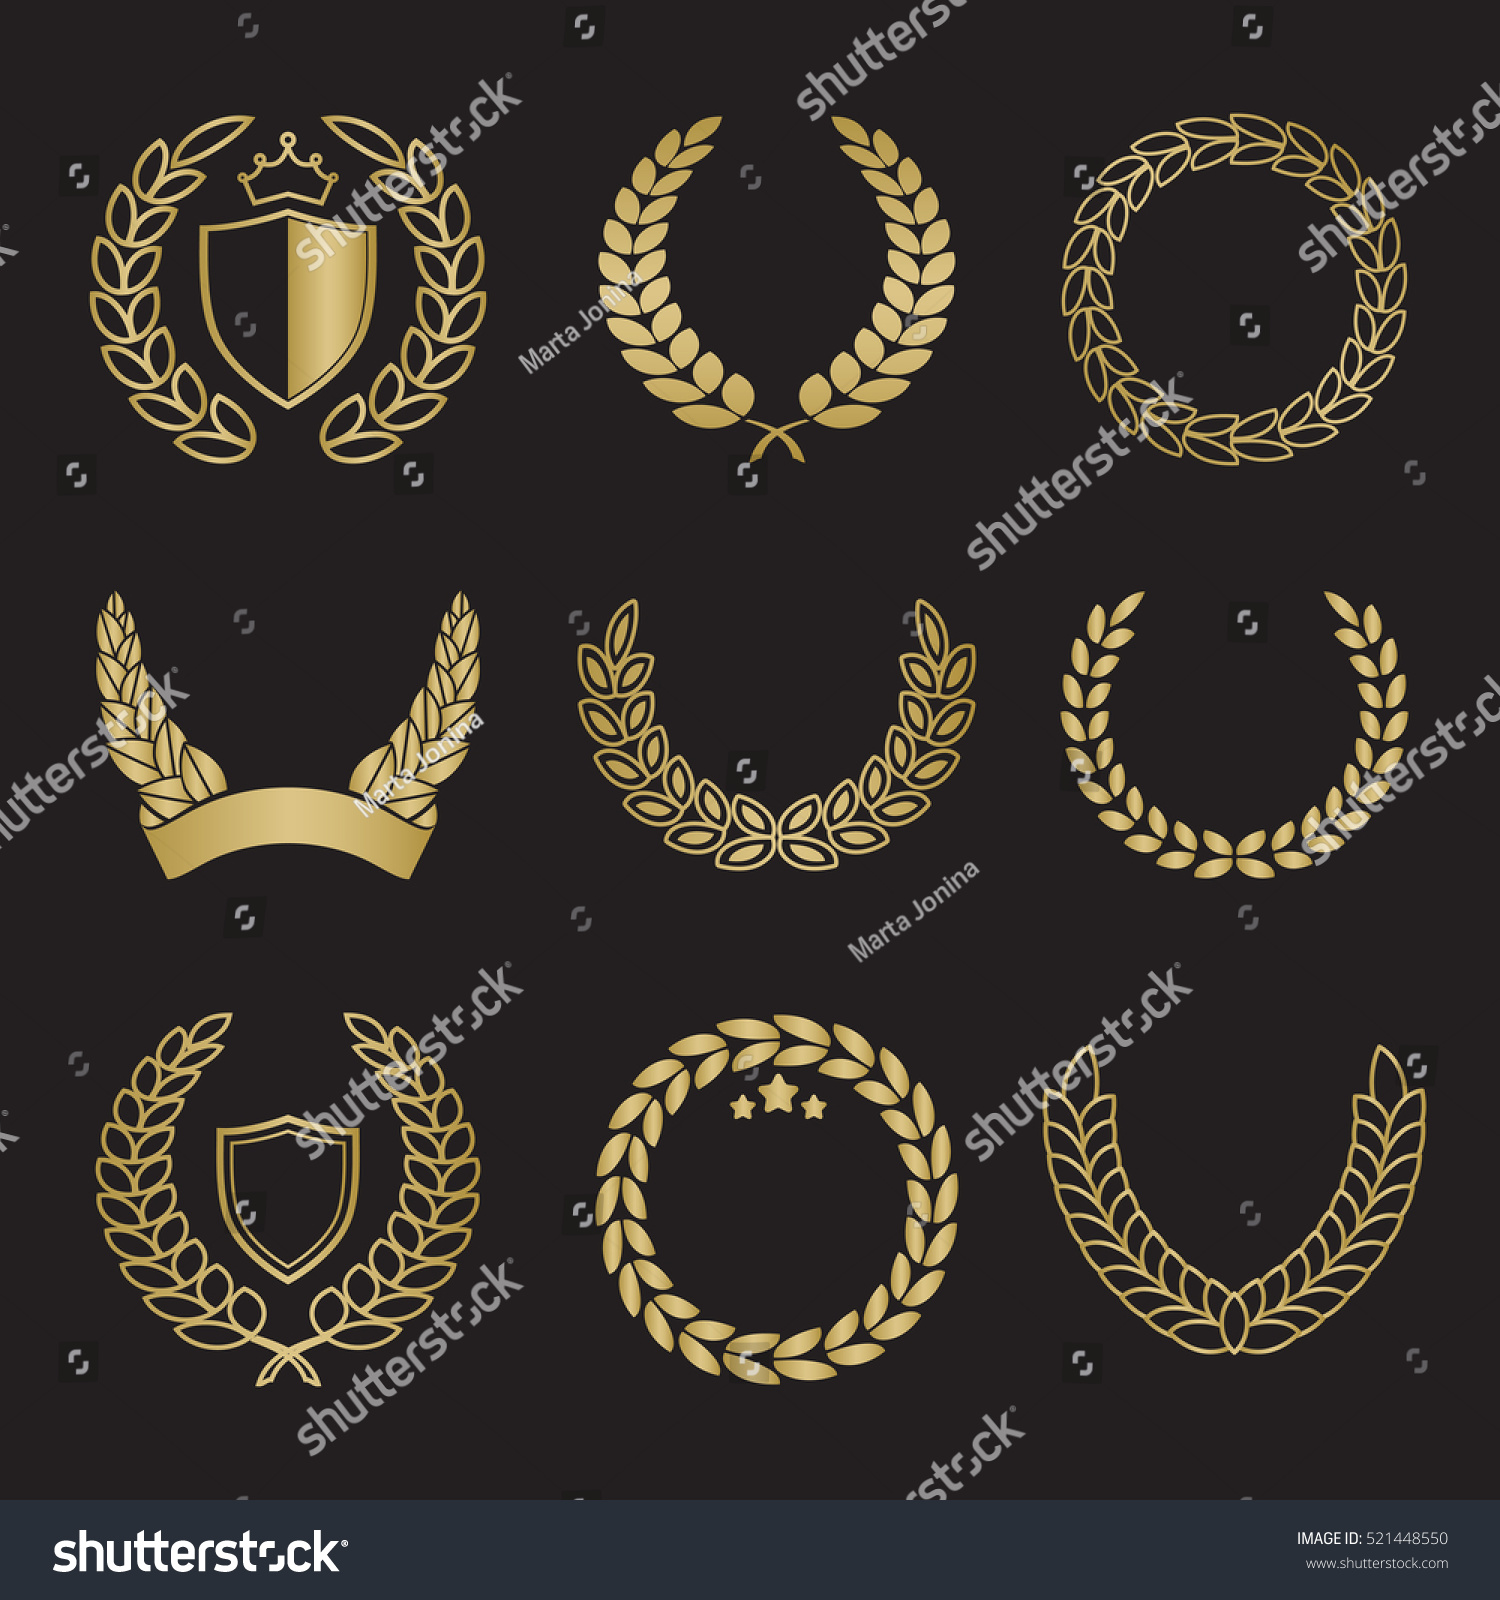 SVG of Silhouette laurel wreaths in different shapes - half circle, circle with shields, crowns and stars in gold color svg